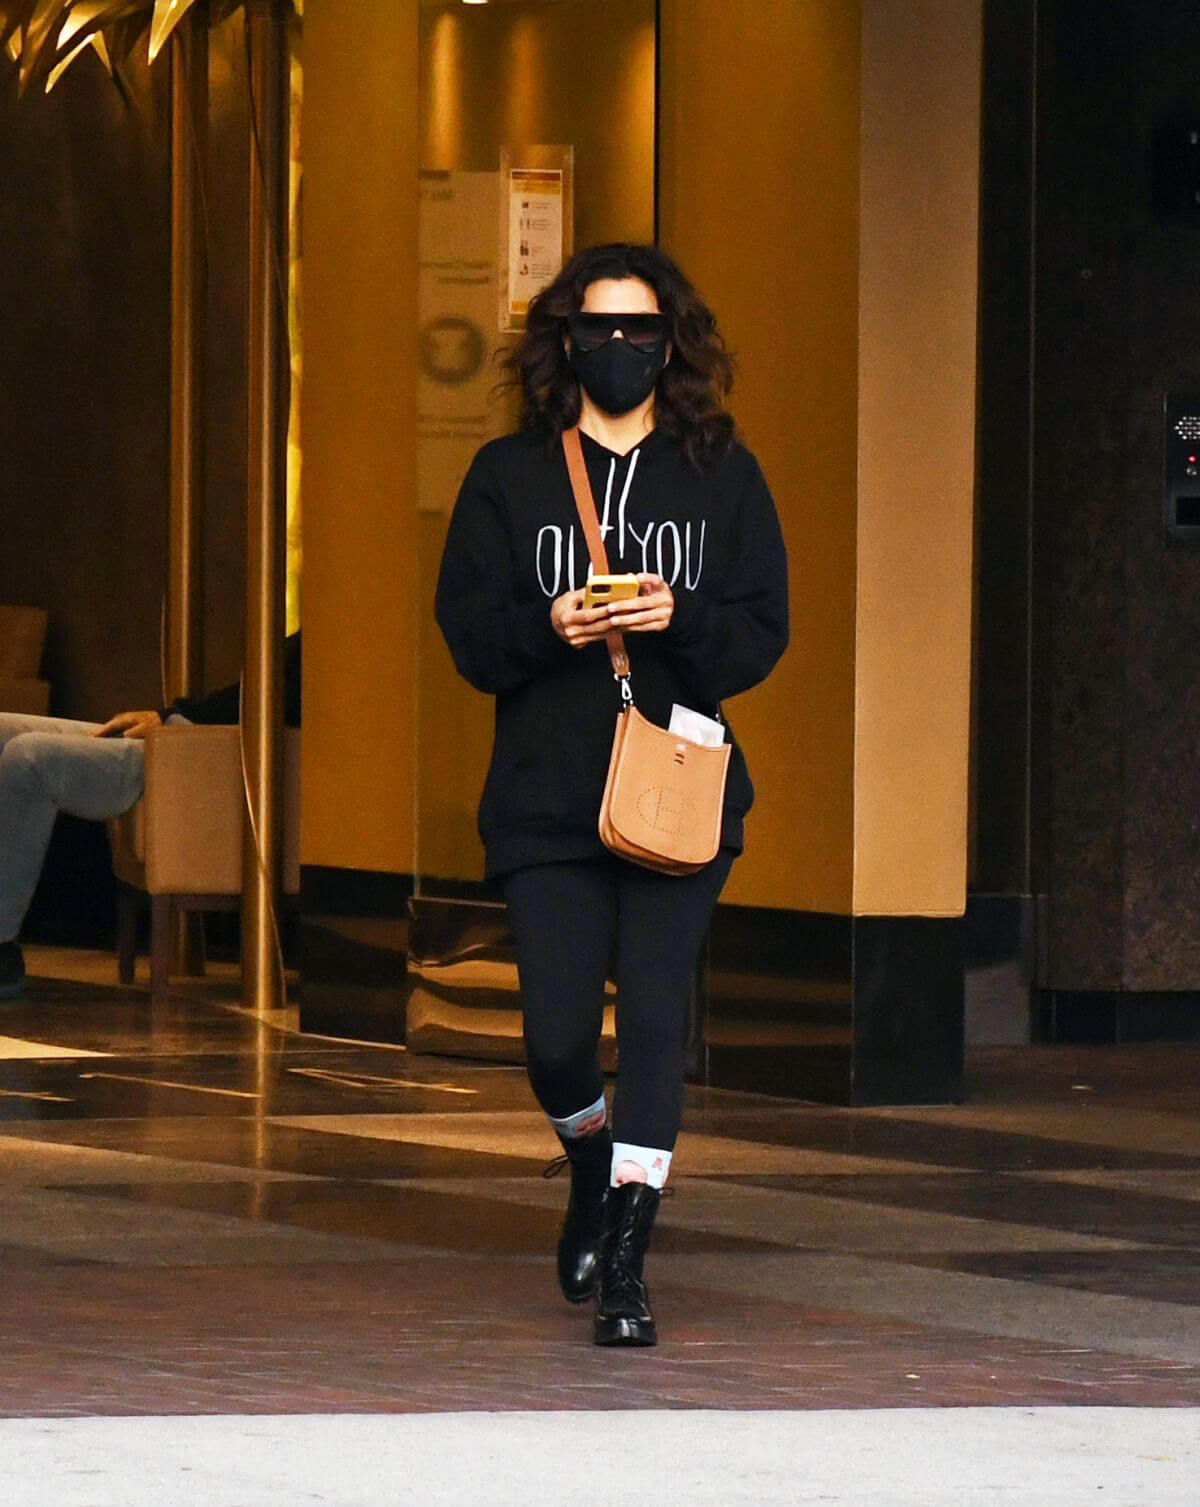 Eva Longoria seen Black Outfit and Wearing a Mask Out in Los Angeles 11/23/2020 7